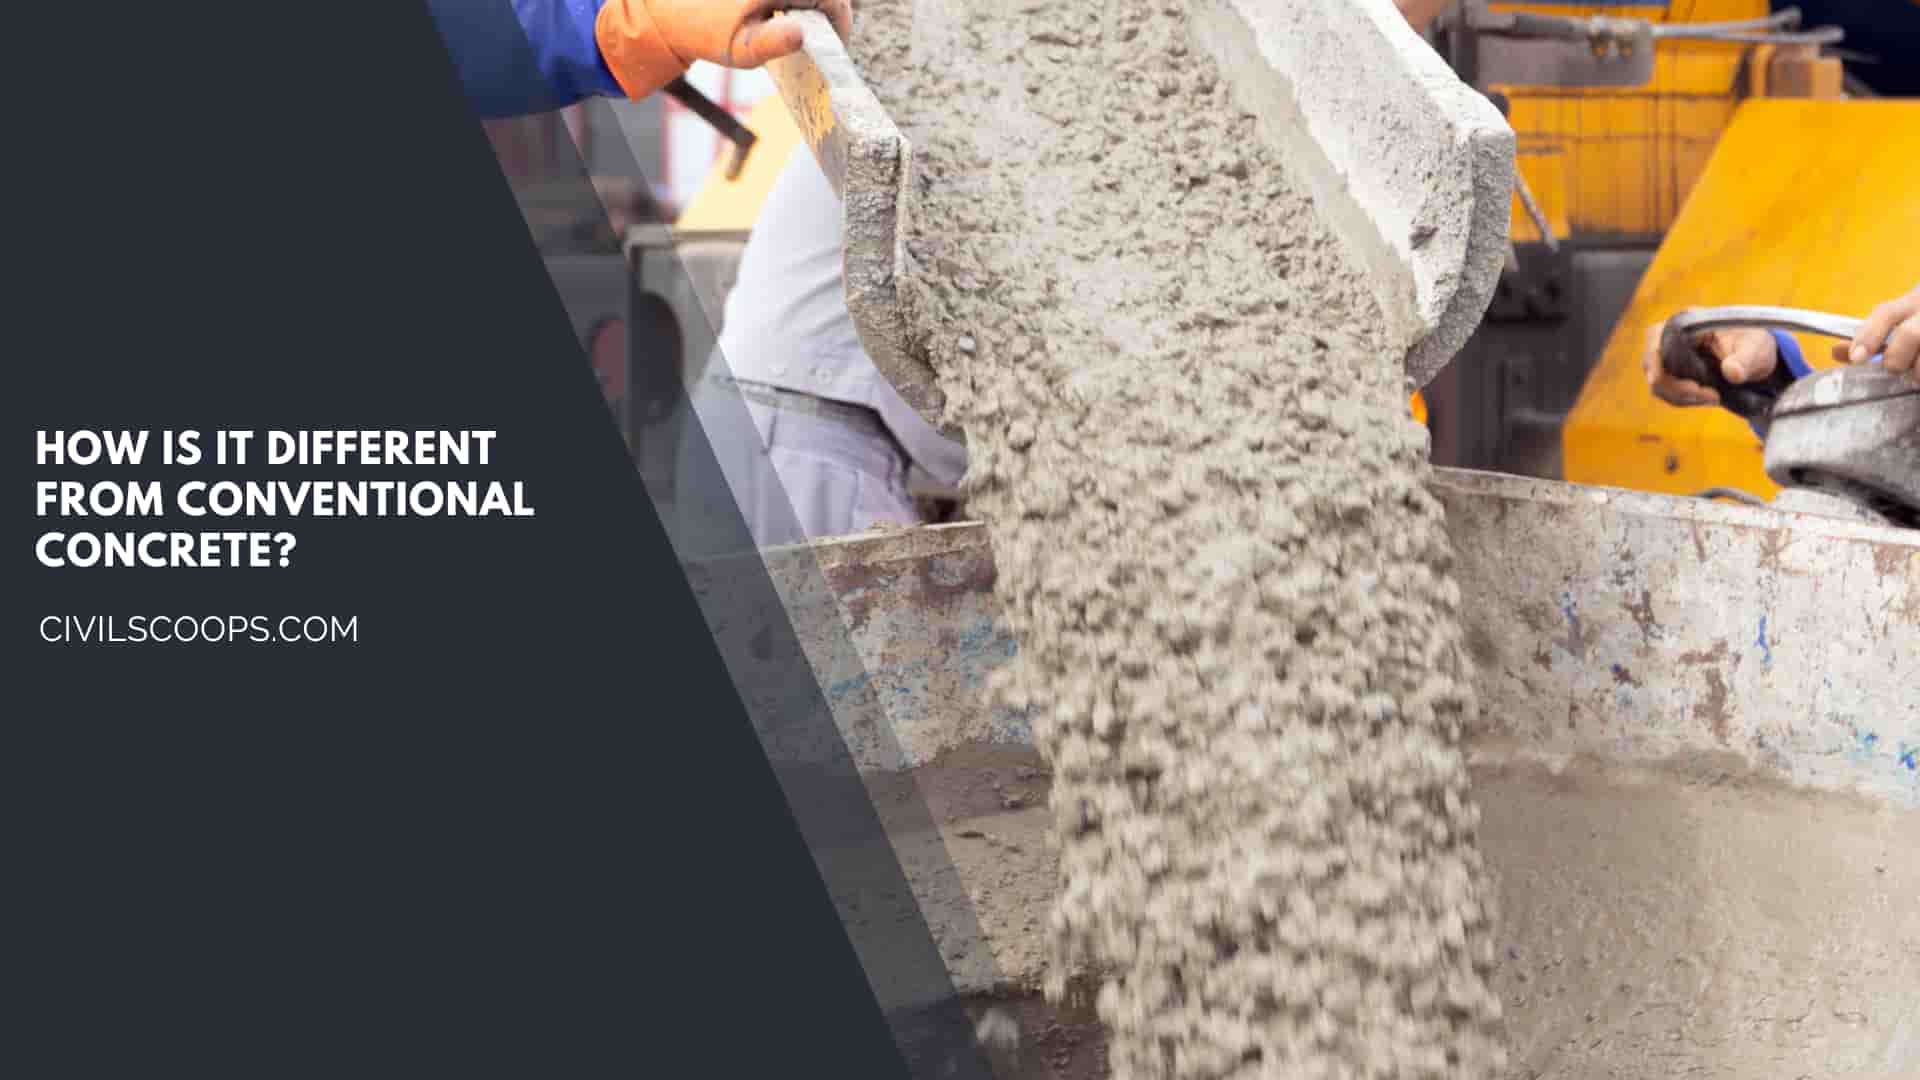 How Is It Different from Conventional Concrete?